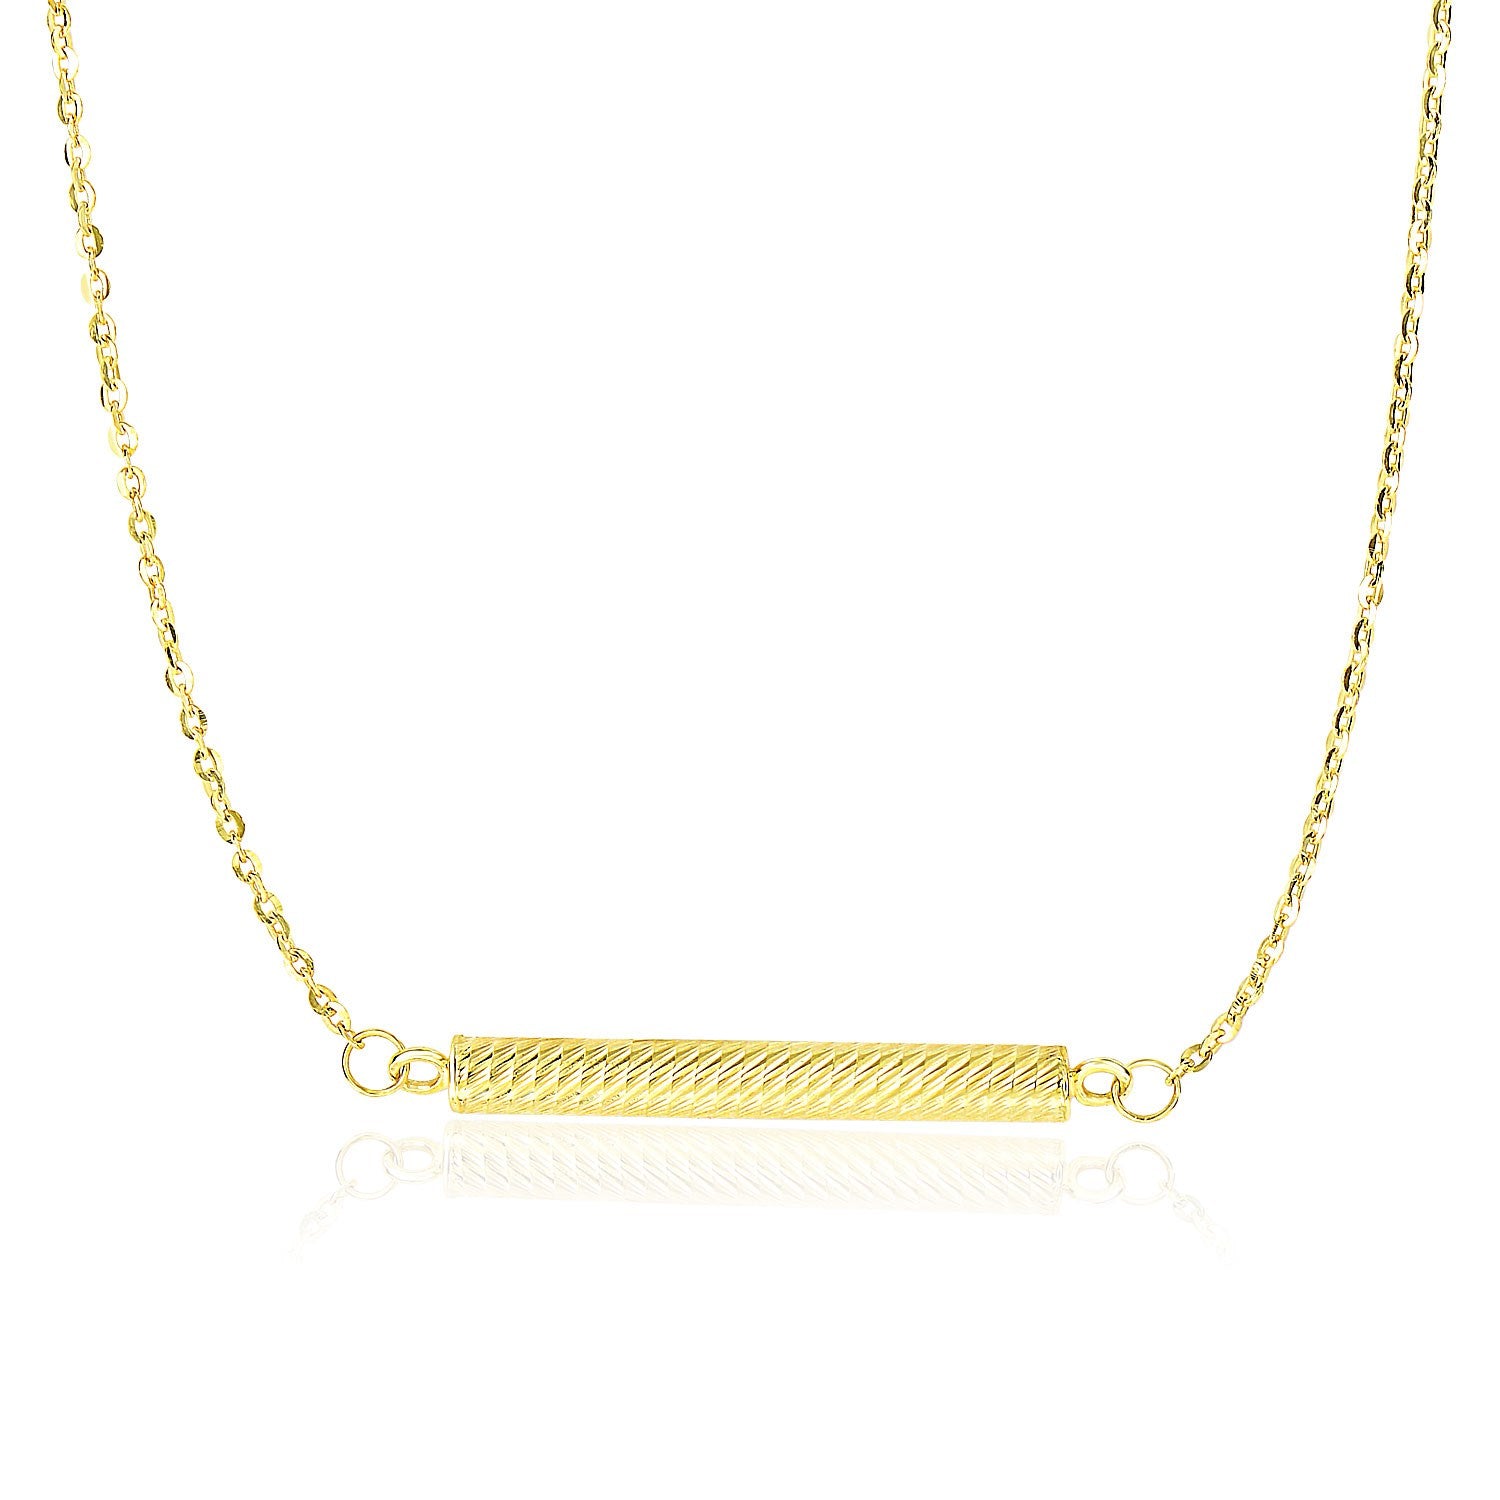 14k Yellow Gold Textured Bar Style Chain Necklace